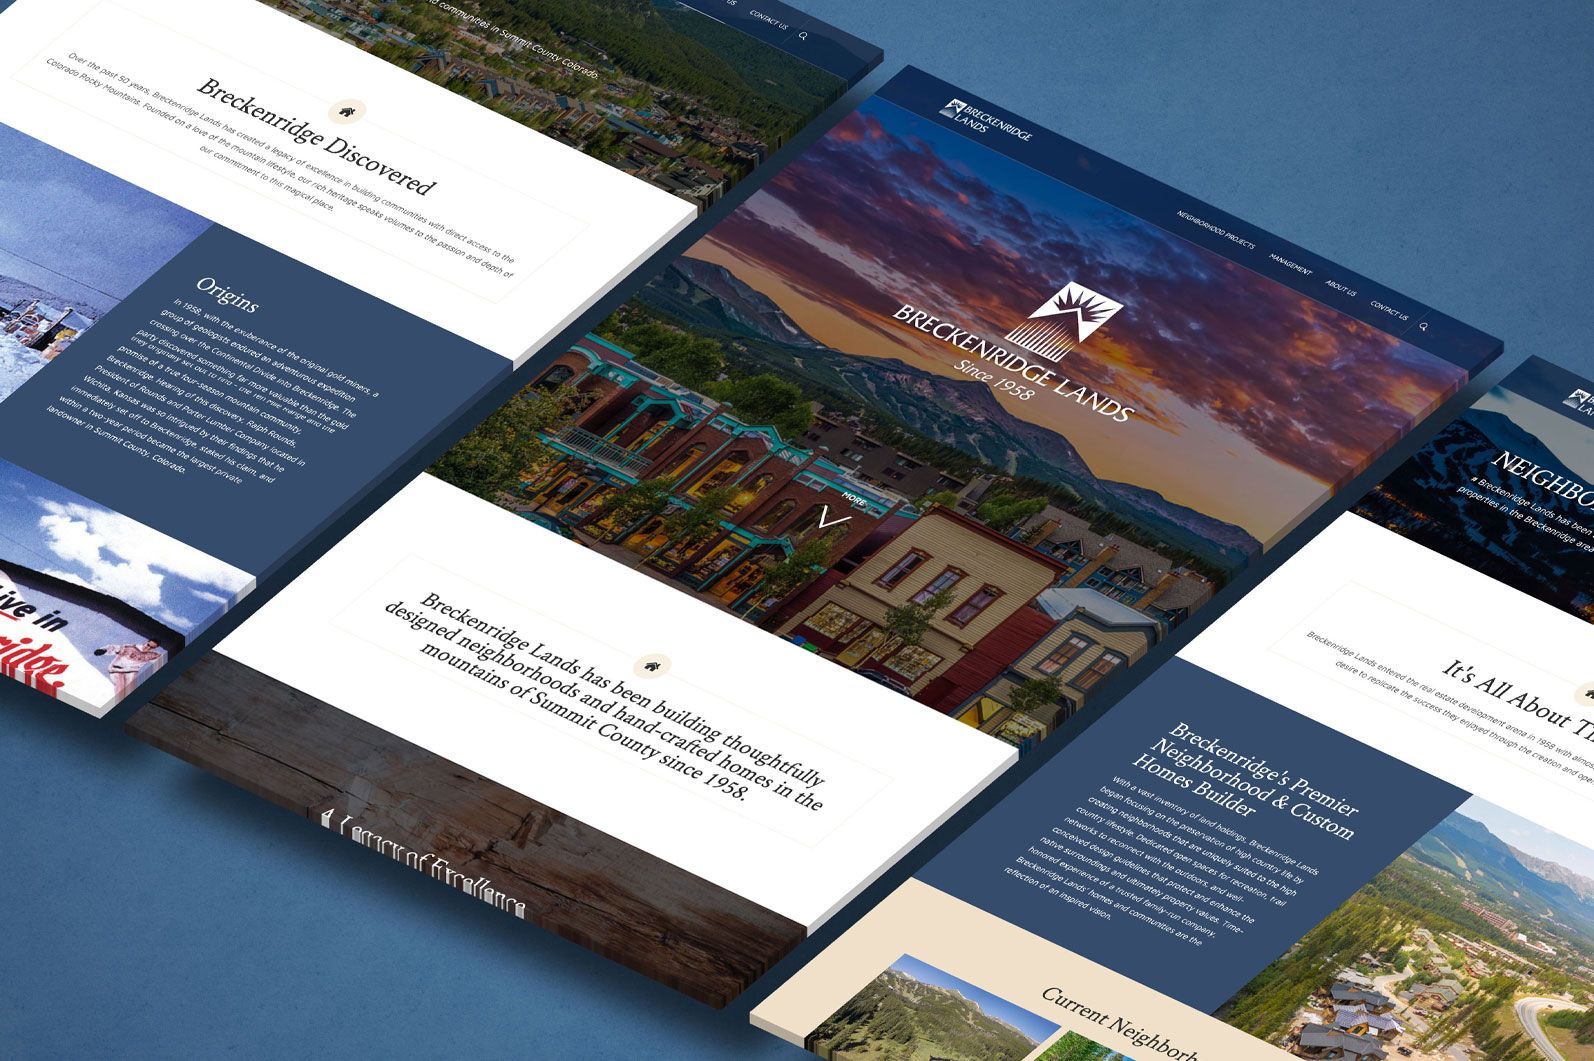 images of a website for a company called Breckenridge lands